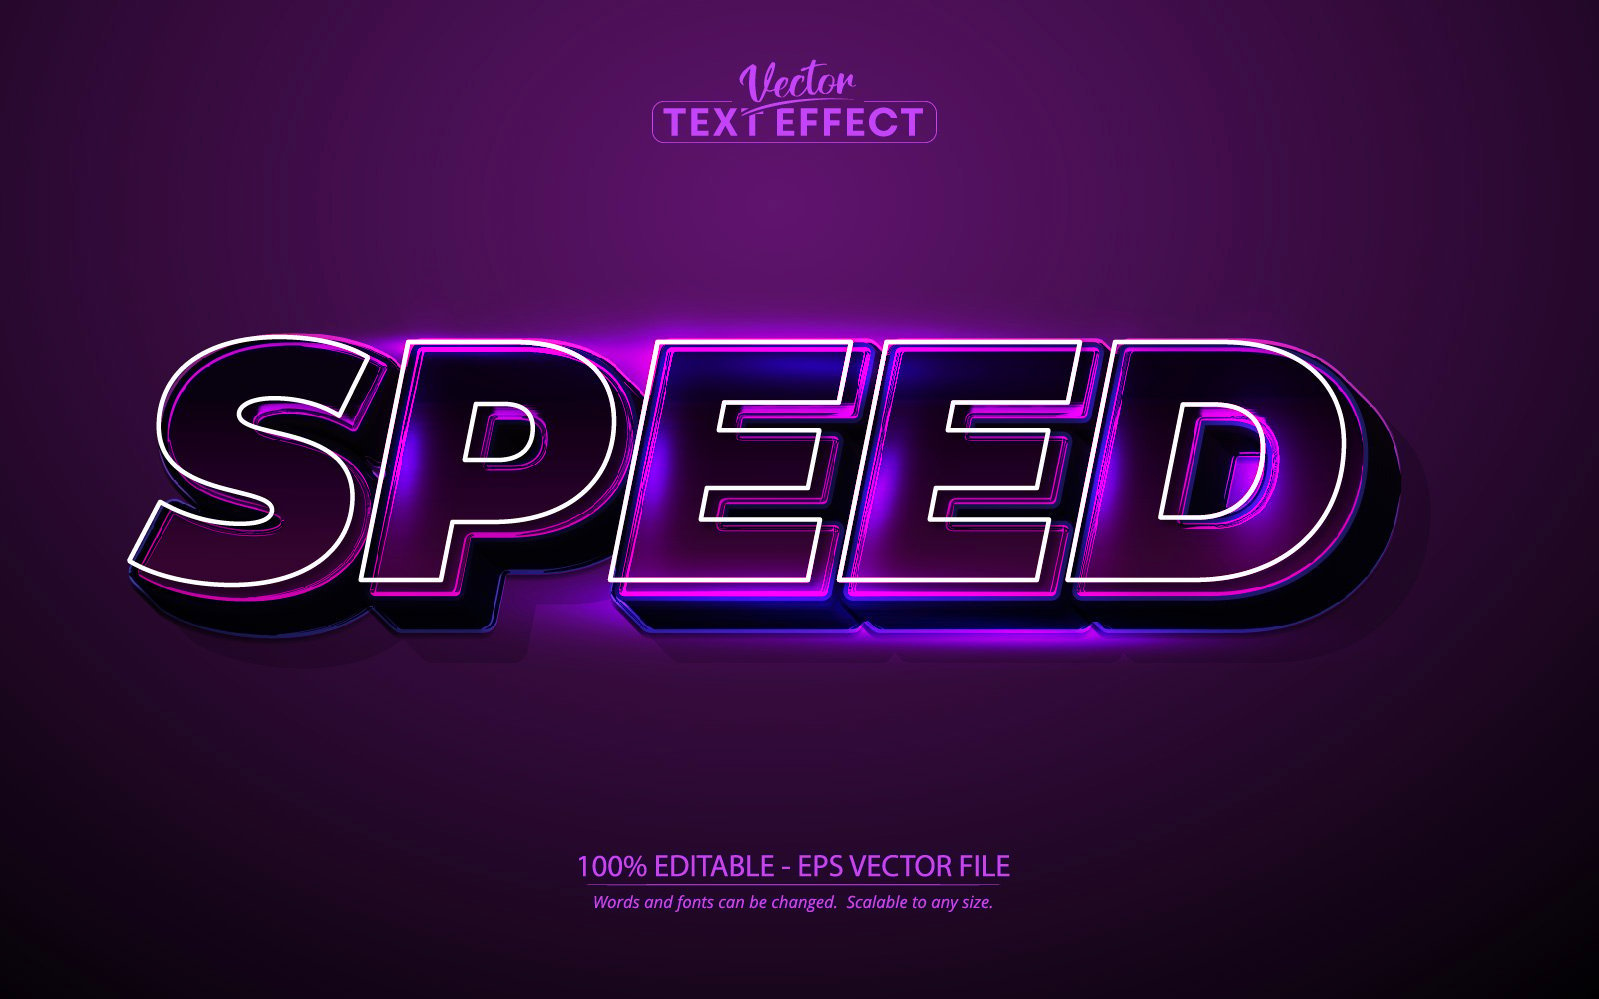 Template #296825 Font Speed Webdesign Template - Logo template Preview